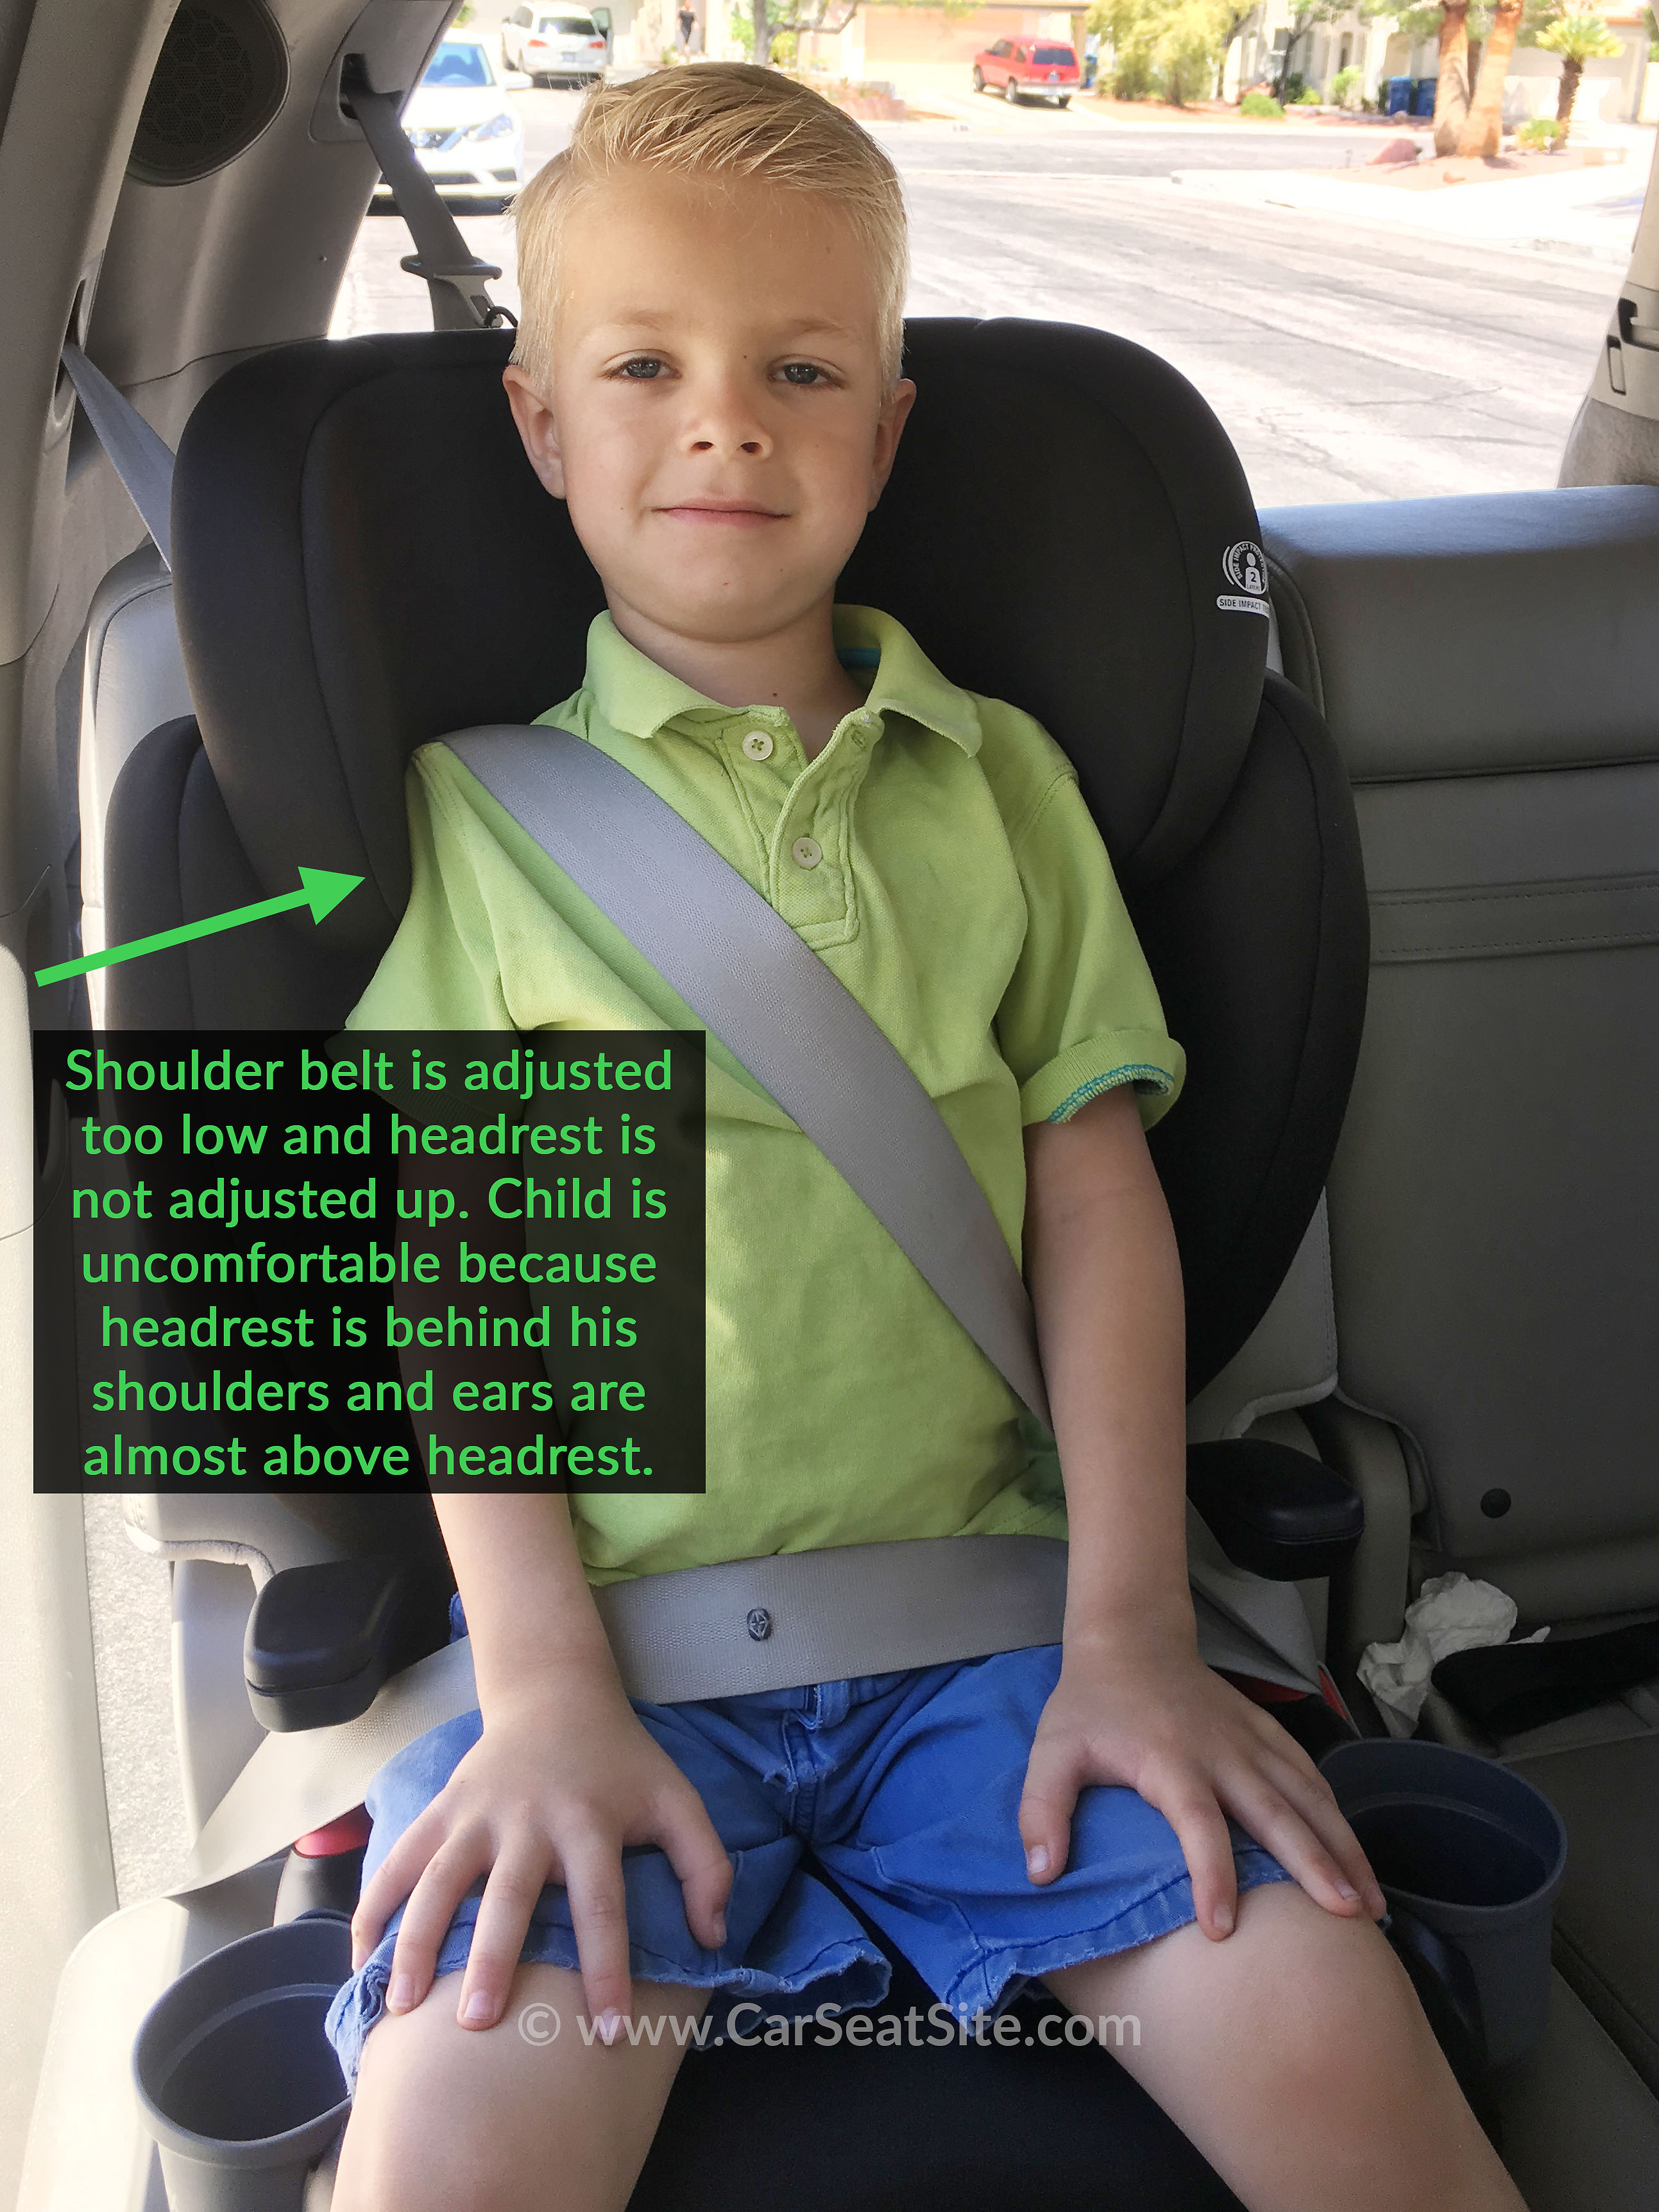 How to Position Car Seat Harness Straps